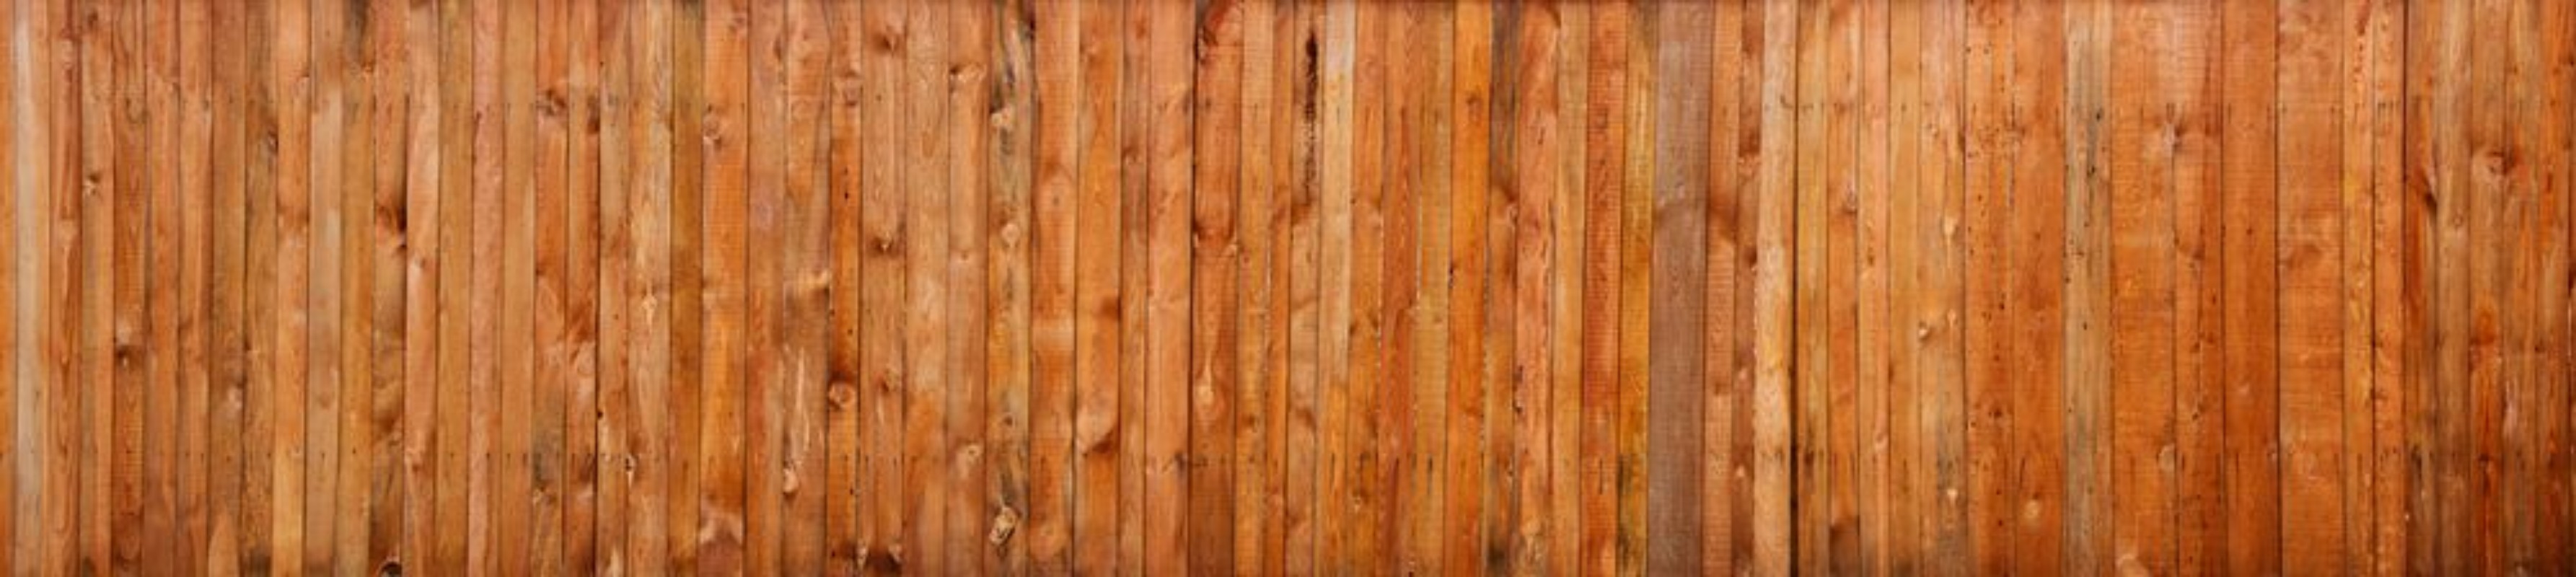 Picture of Brown wood plank wall texture background